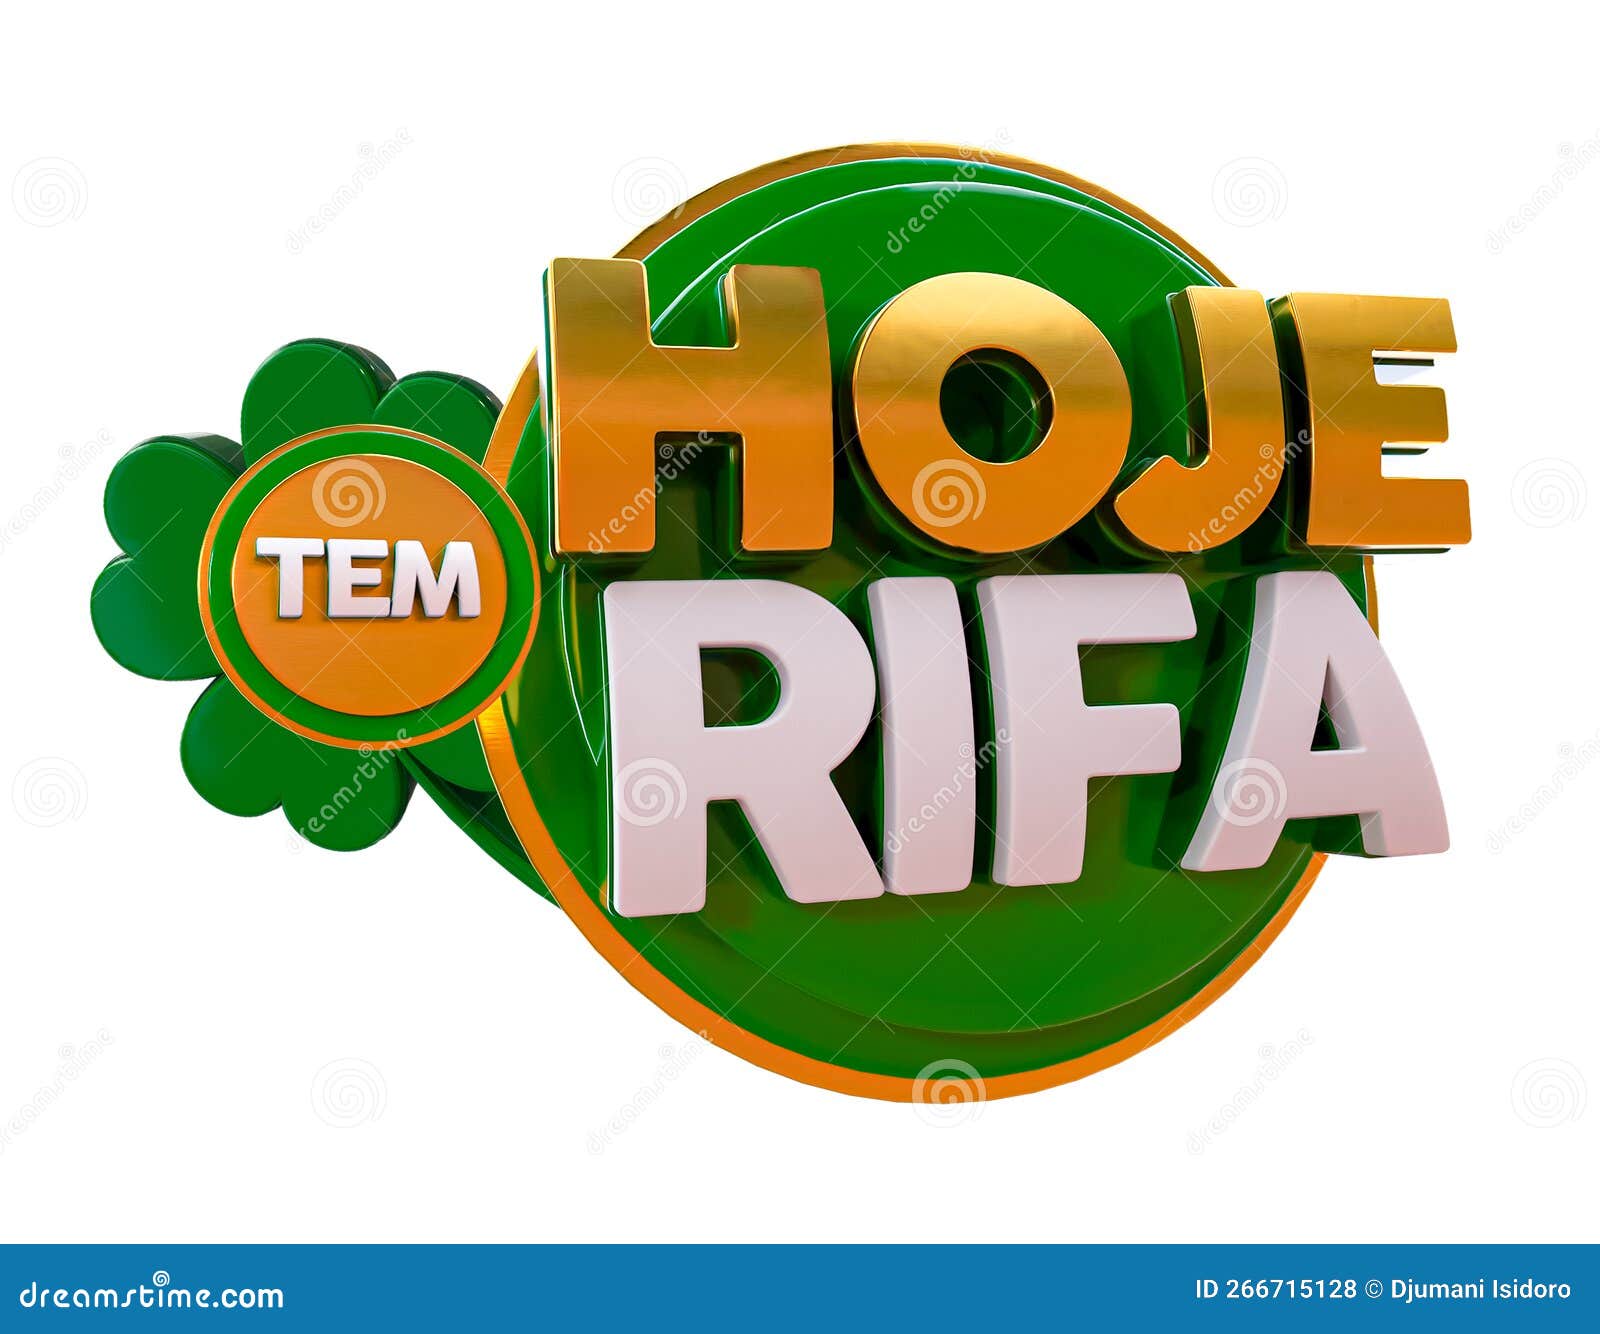 Rifa Projects  Photos, videos, logos, illustrations and branding